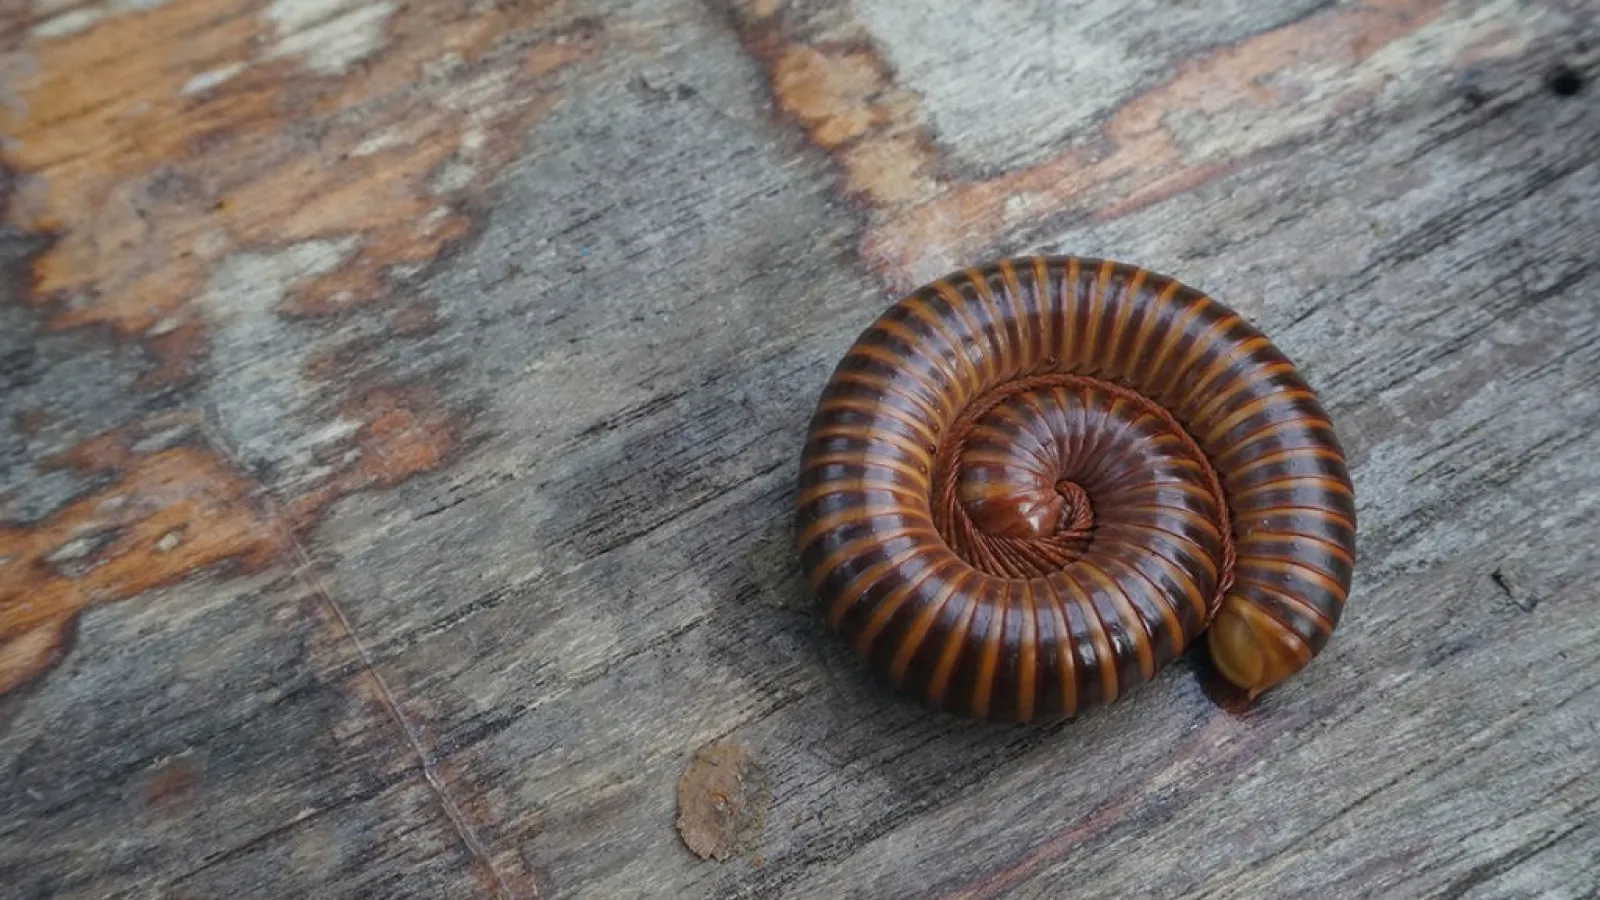 a snail on a wood surface